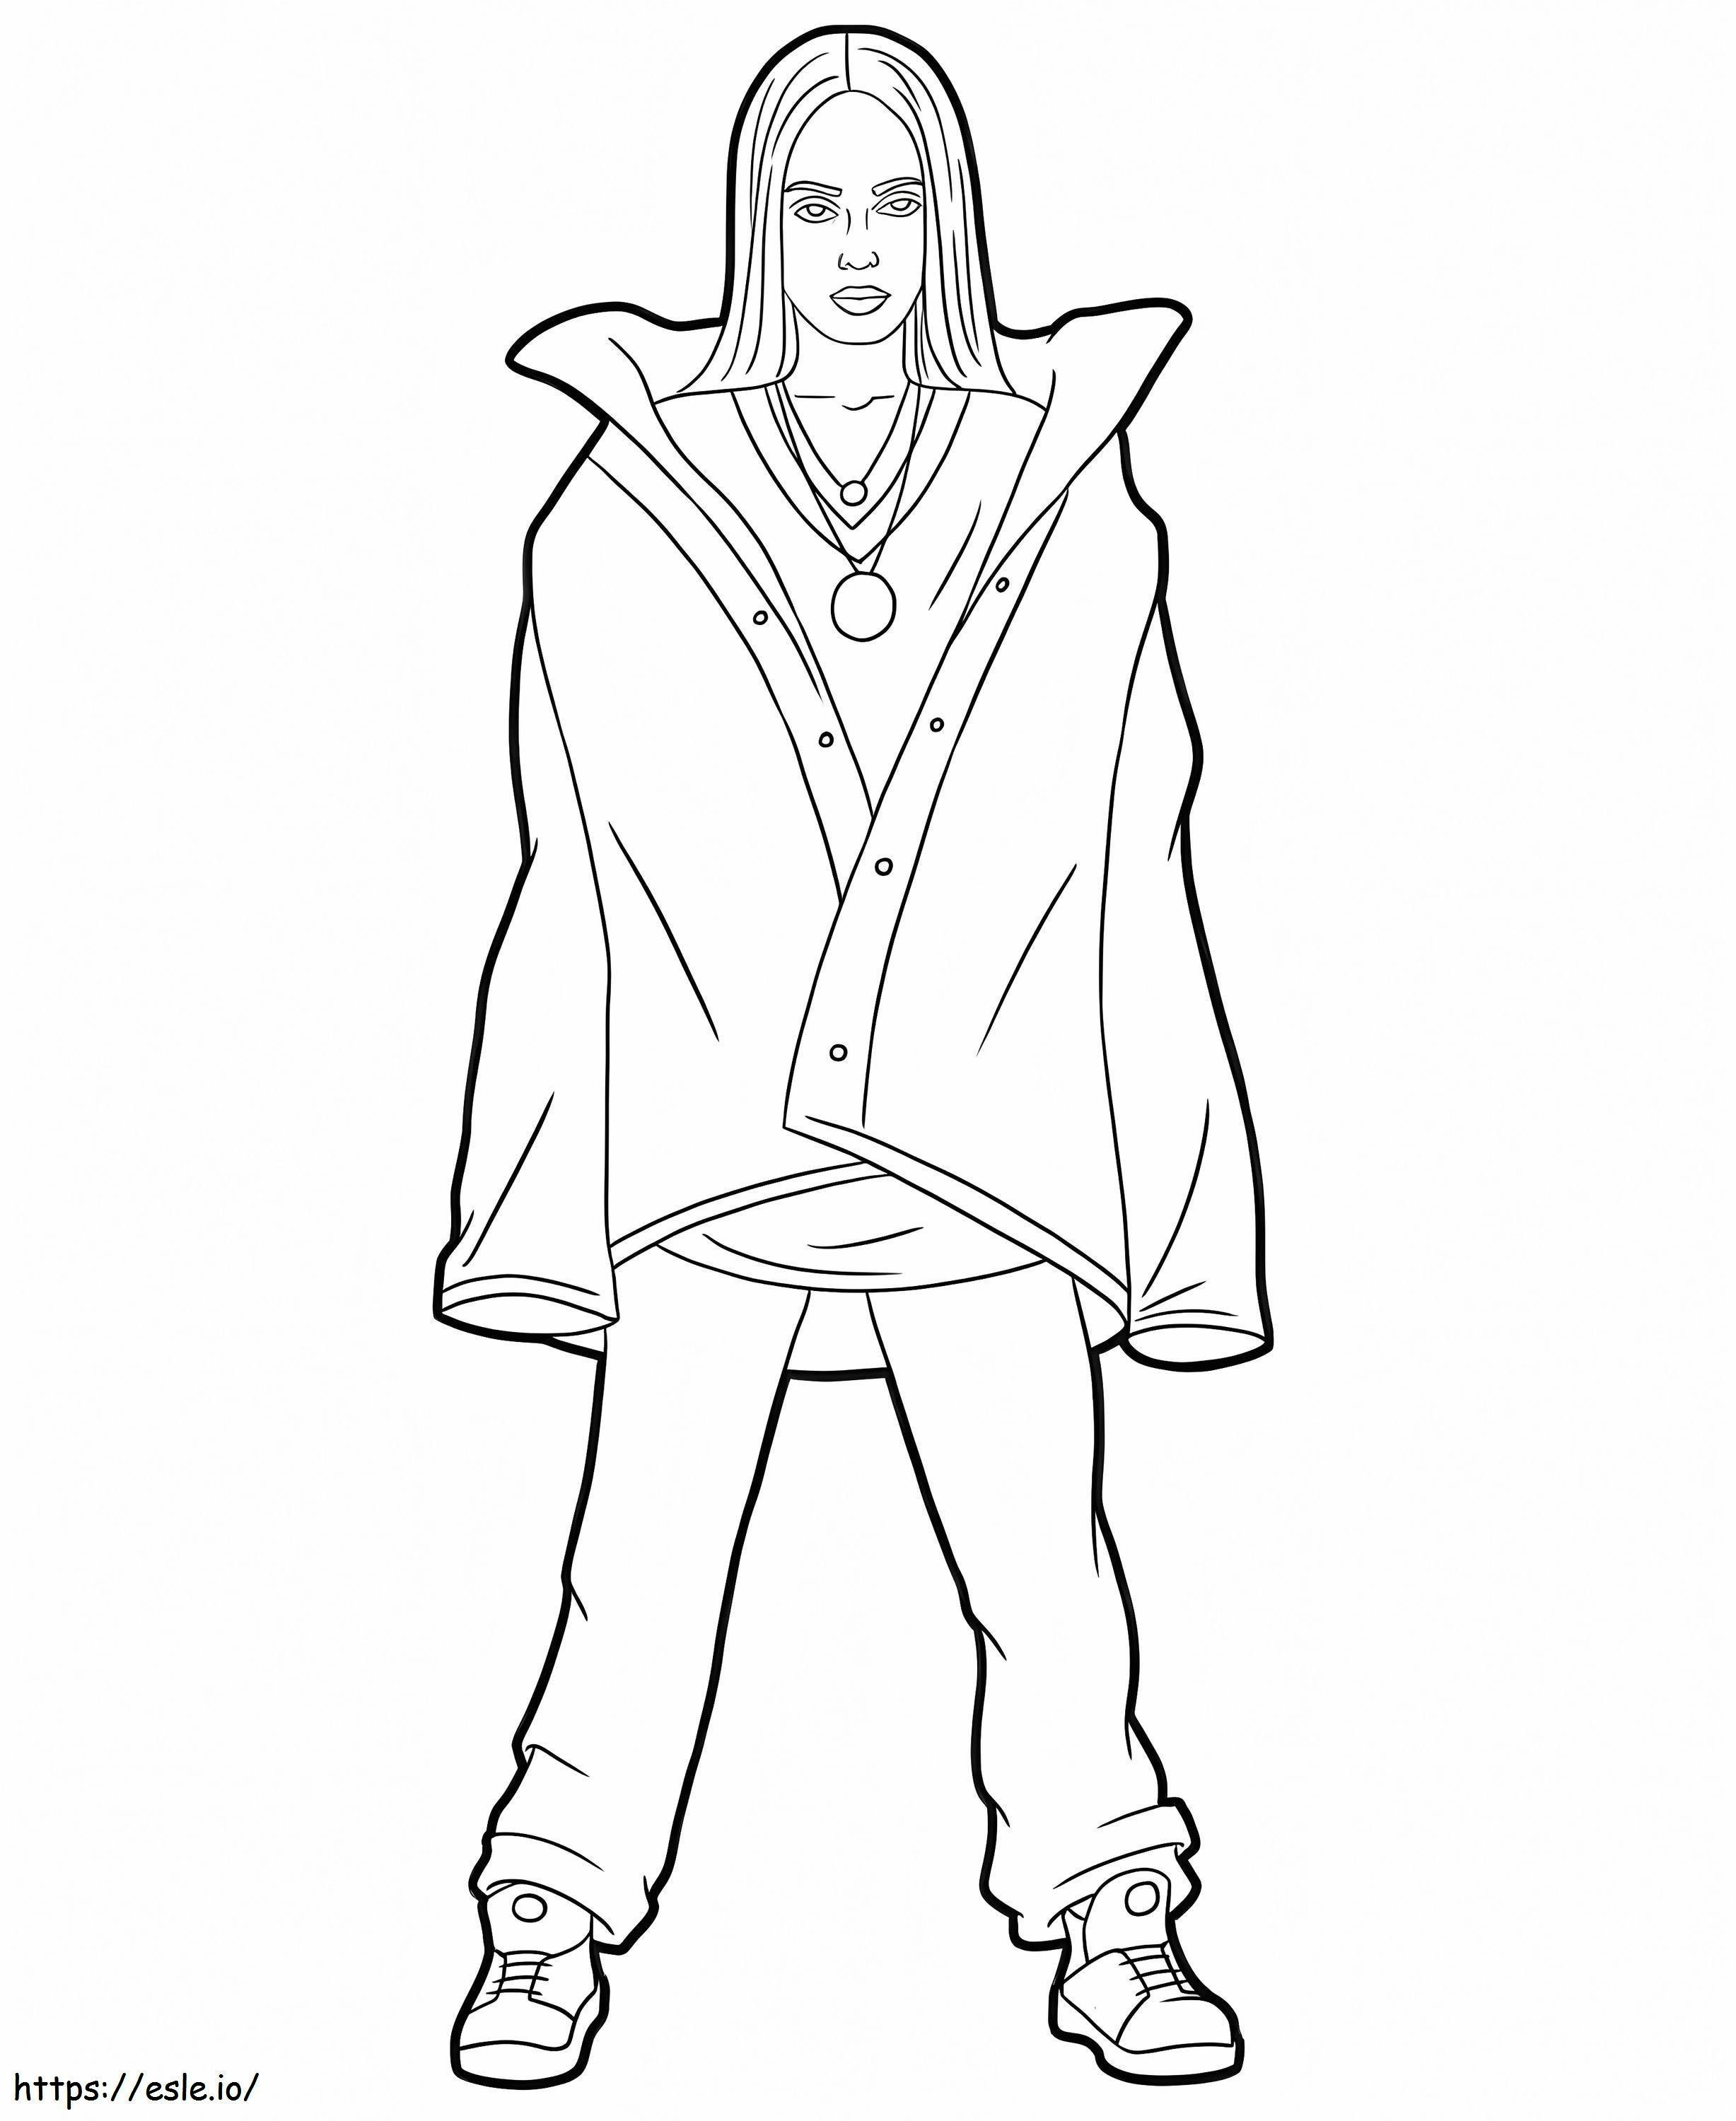 Billie Eilishs Style coloring page